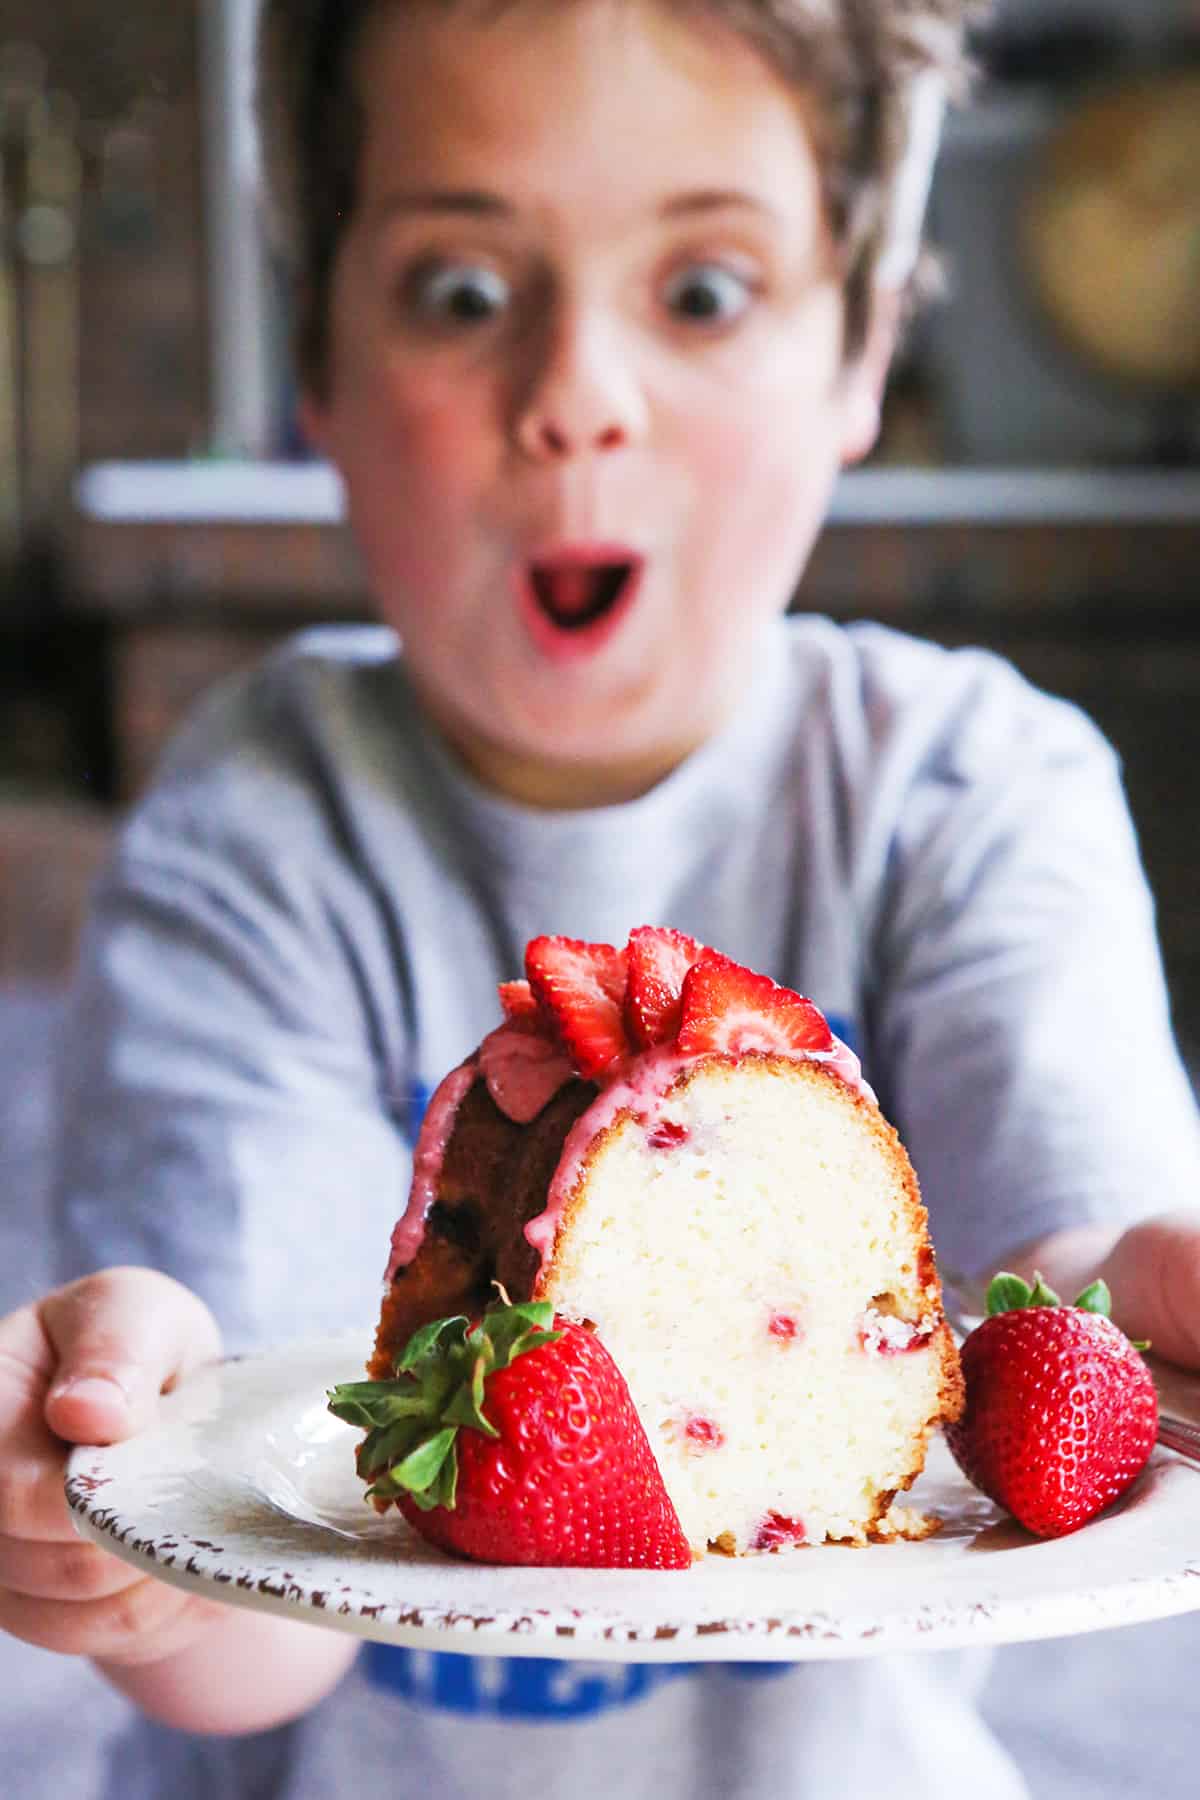 A cute boy with a surprised and happy face, staring at a piece of strawberry cake.